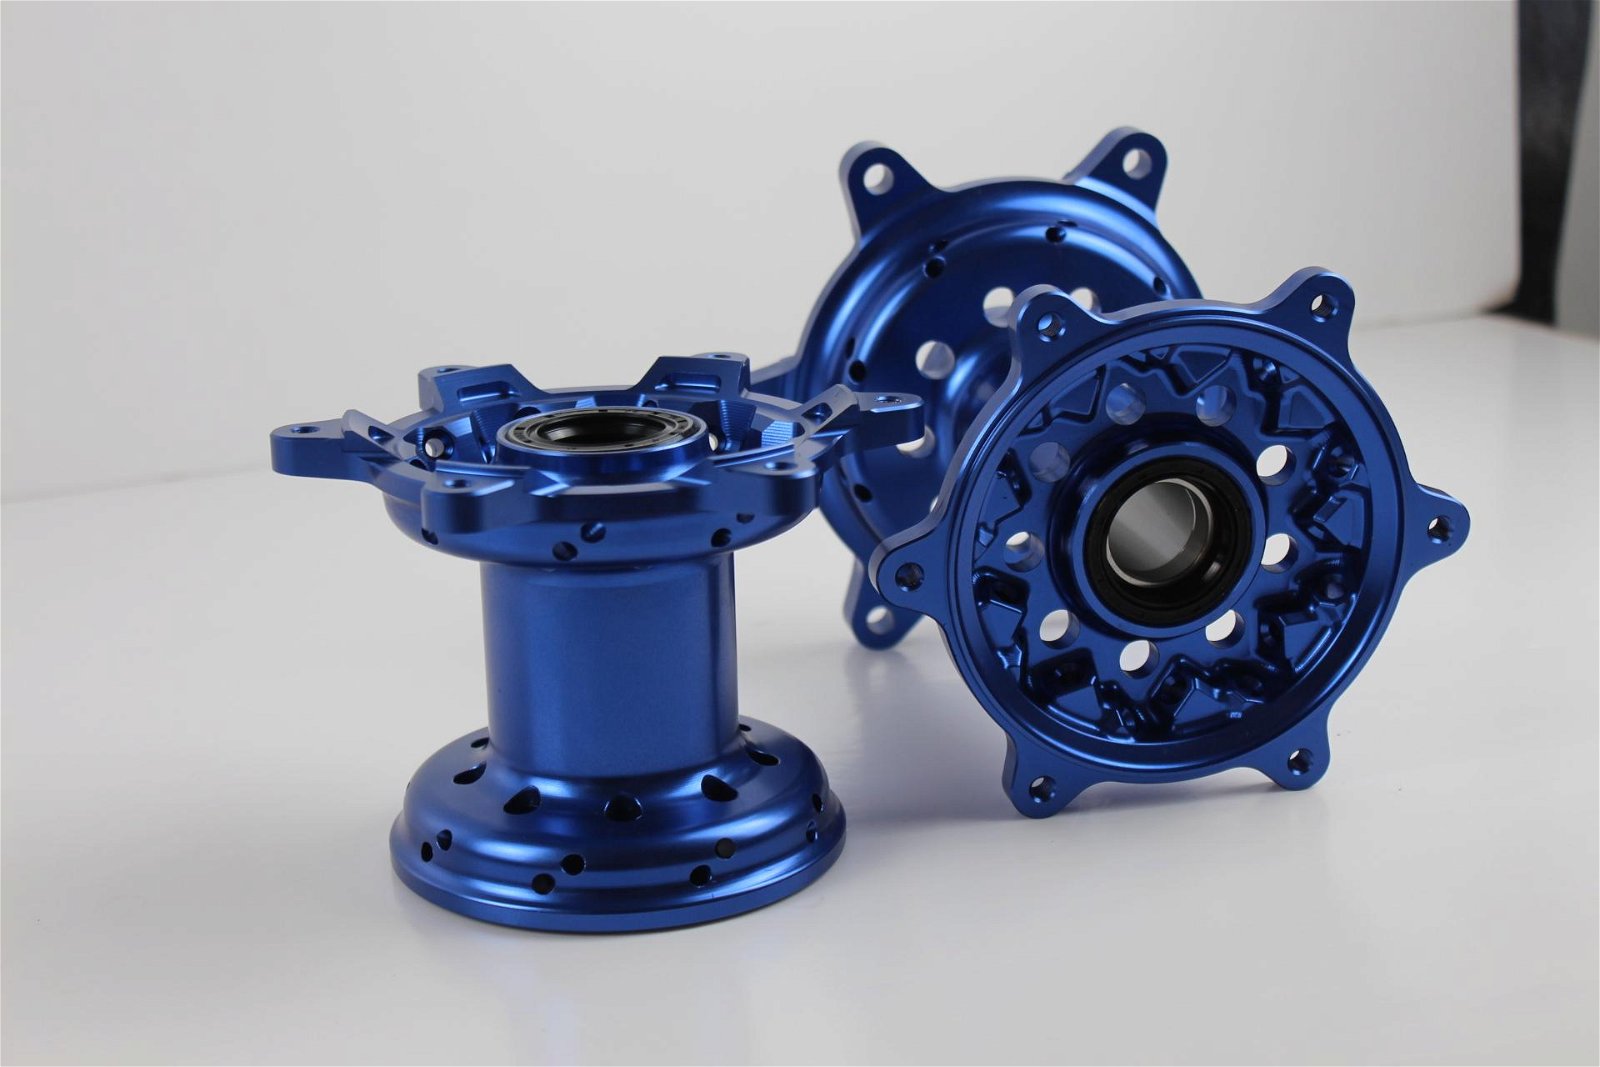 OEM CNC aluminum alloy motorcycle wheel hubs for supermoto